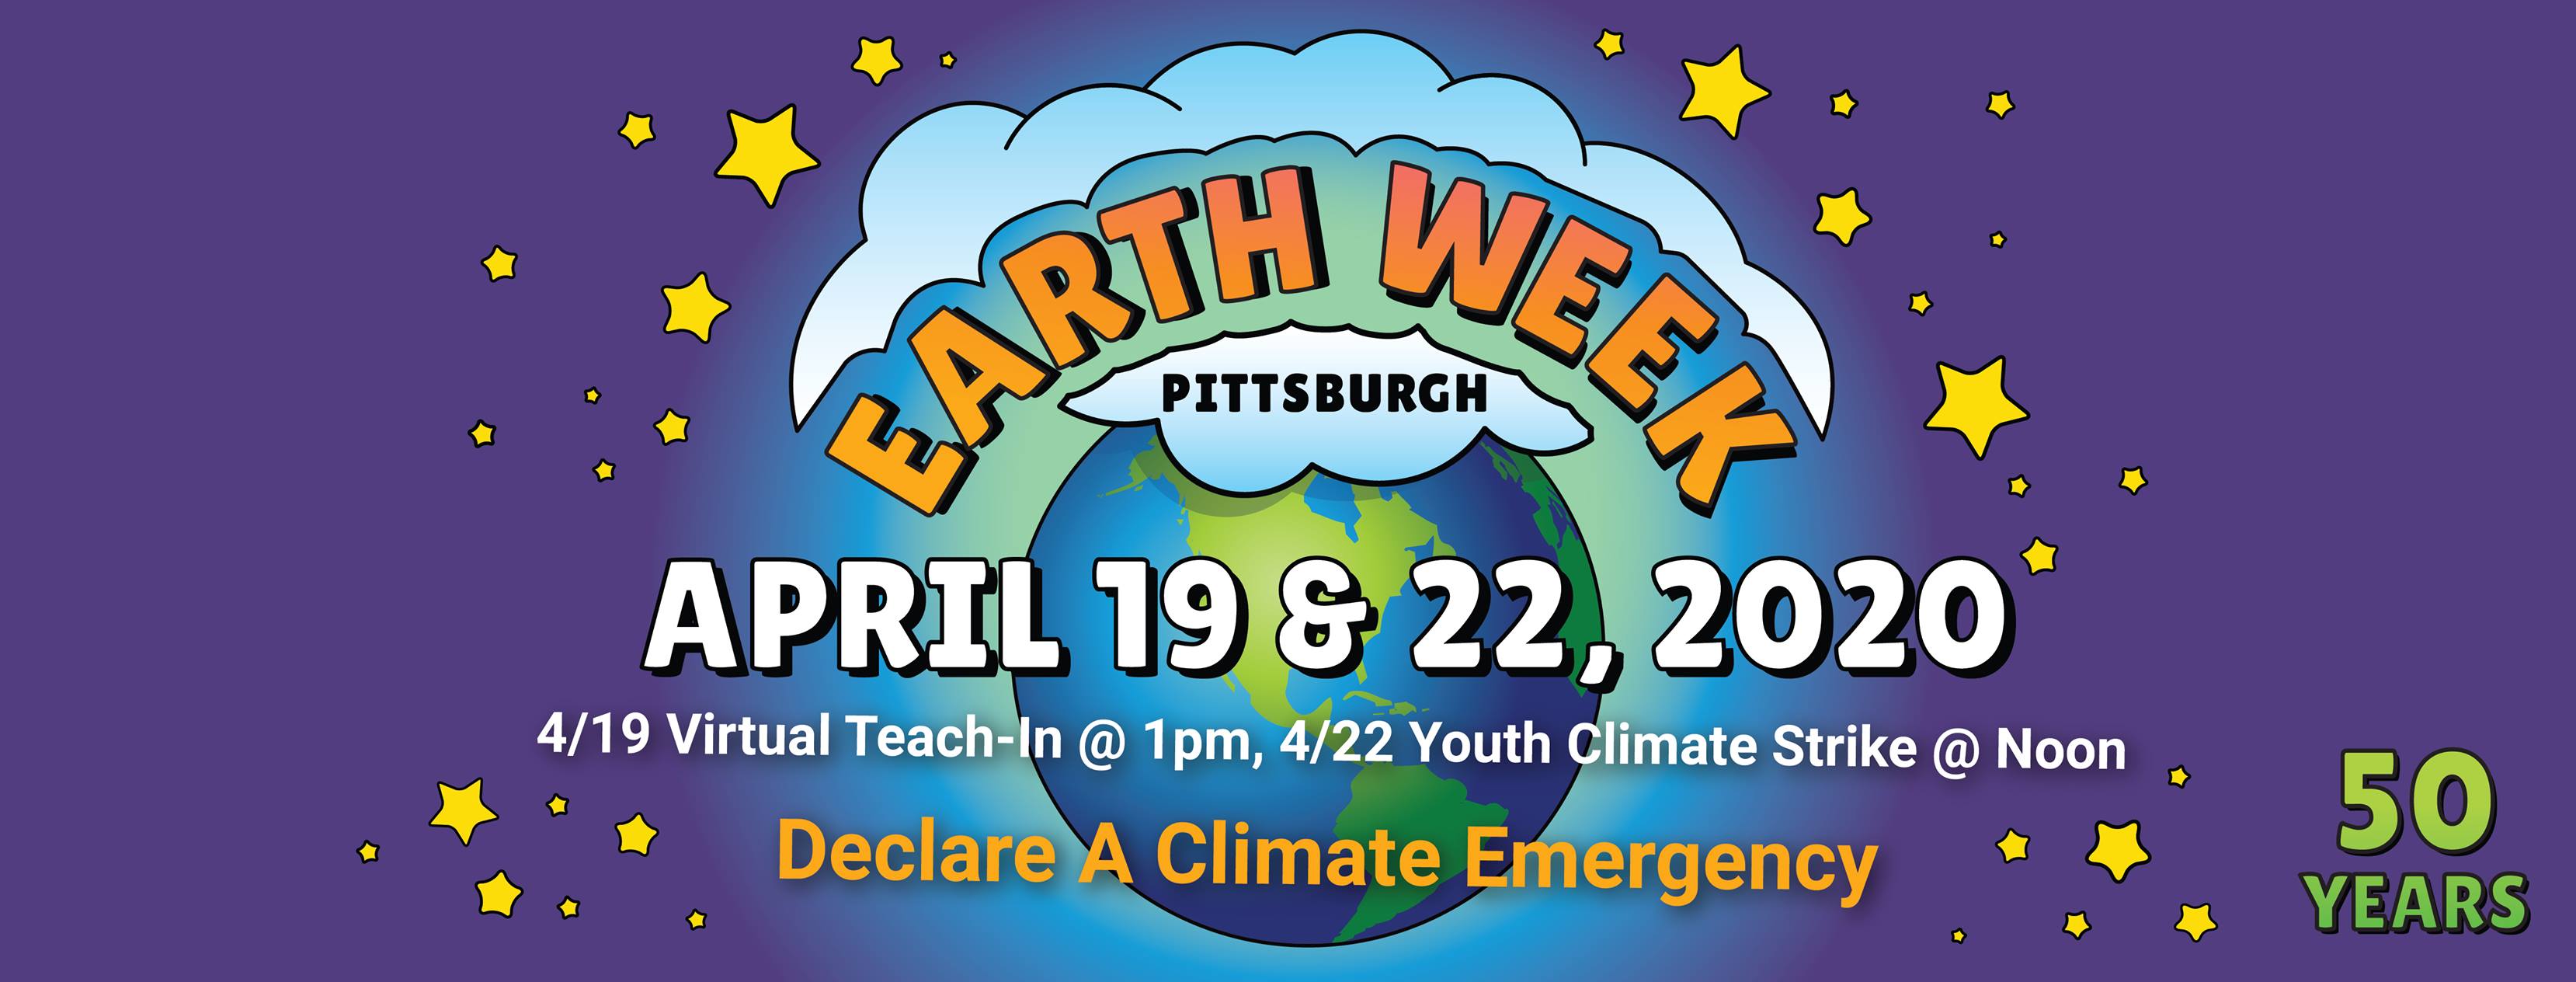 EARTH WEEK  Pittsburgh - Virtual Teach-in & Youth Climate Strike @ Online and Instagram